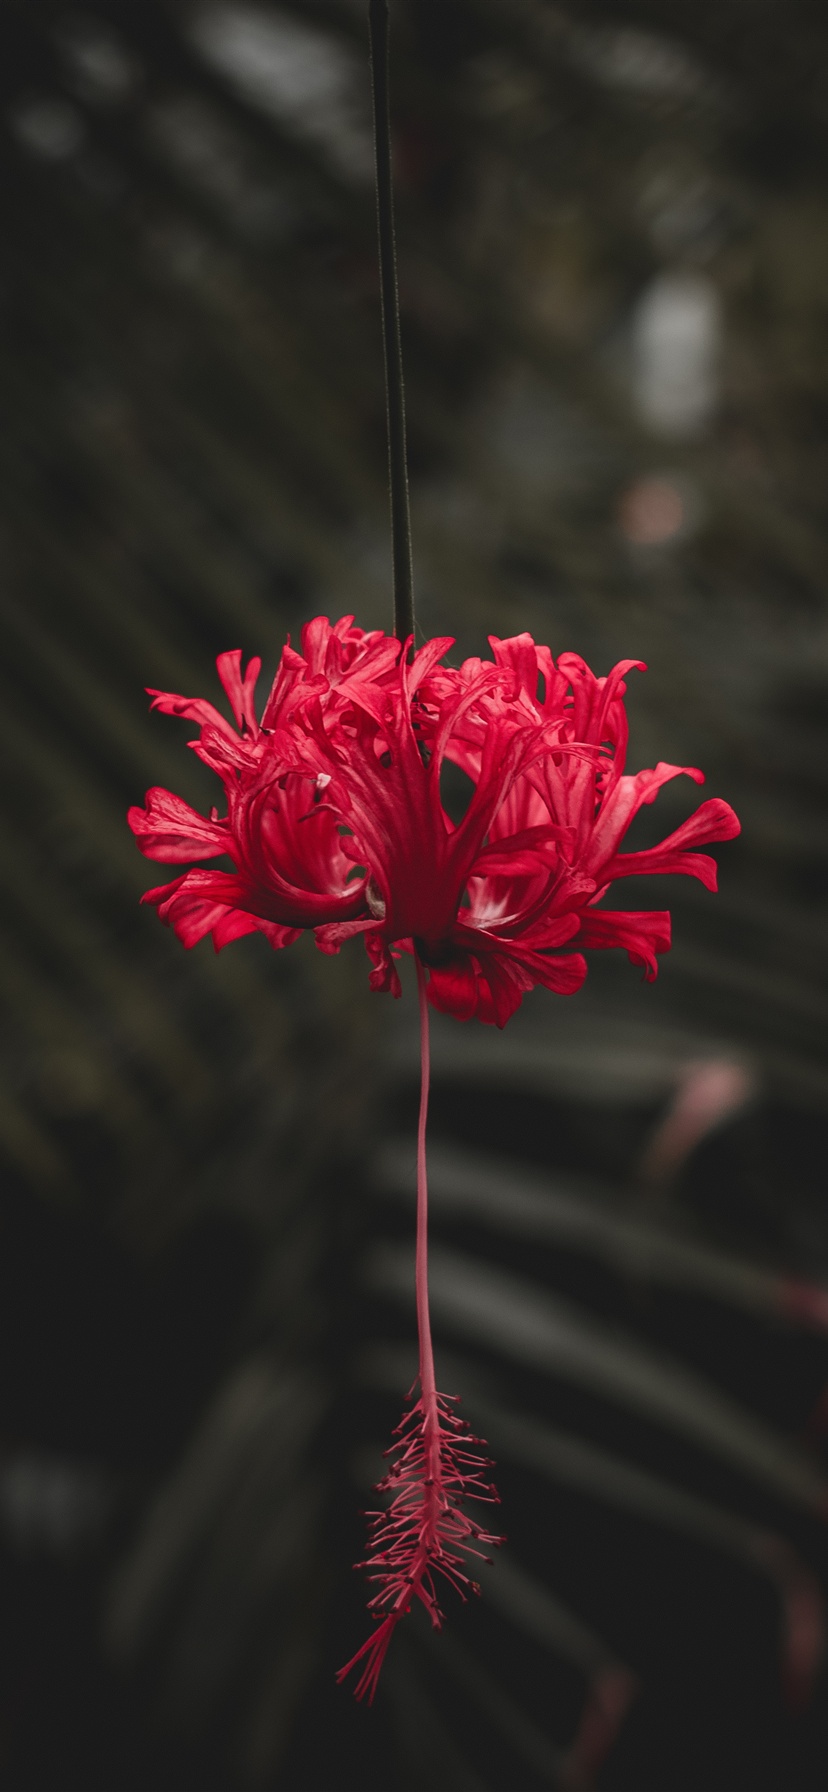 Red hibiscus flower iPhone XS Max, X 3GS wallpaper download